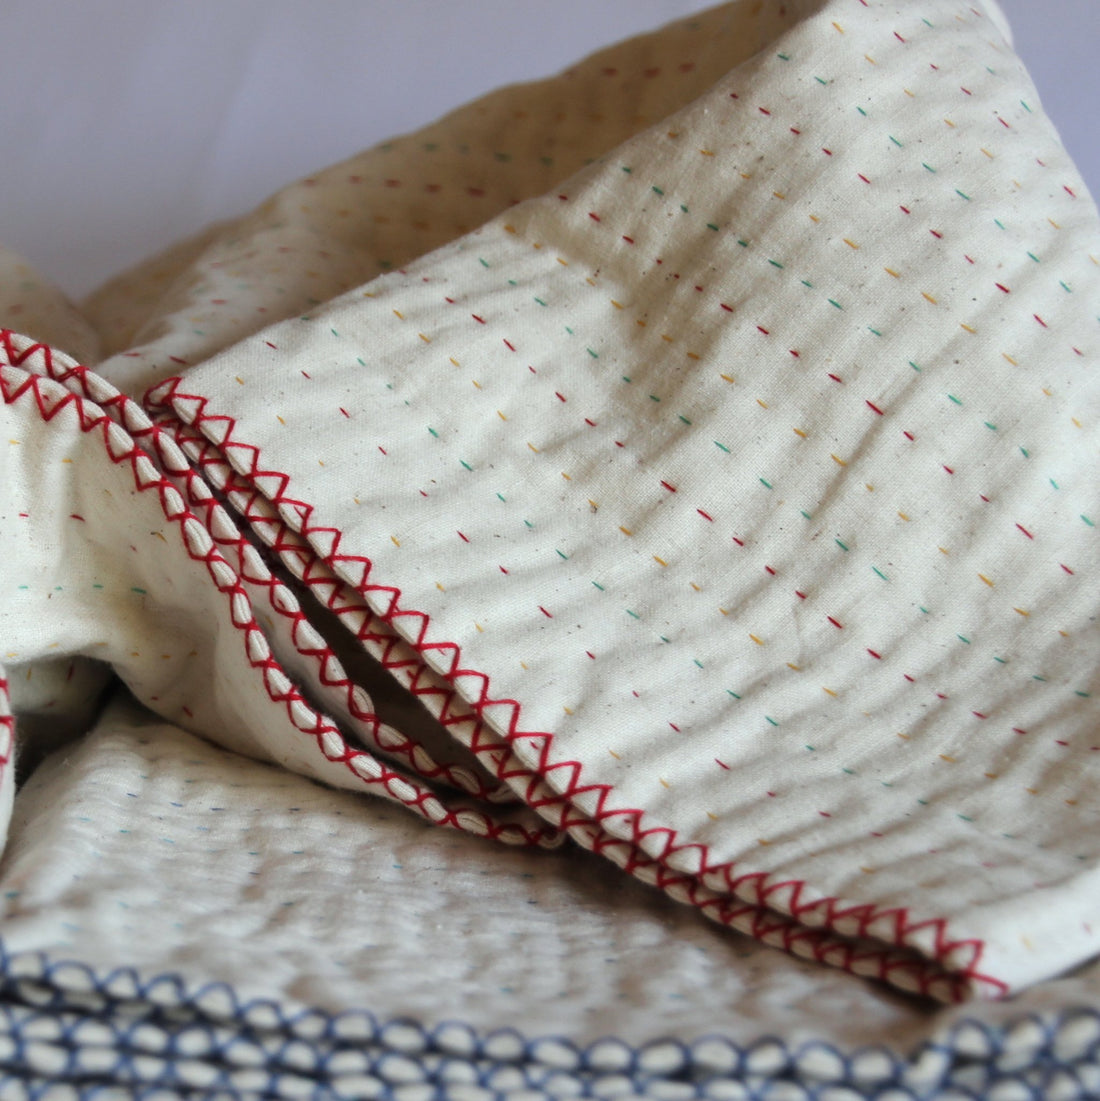 Blankets fair trade ethical sustainable fashion Natural Cotton Throw conscious purchase Basha